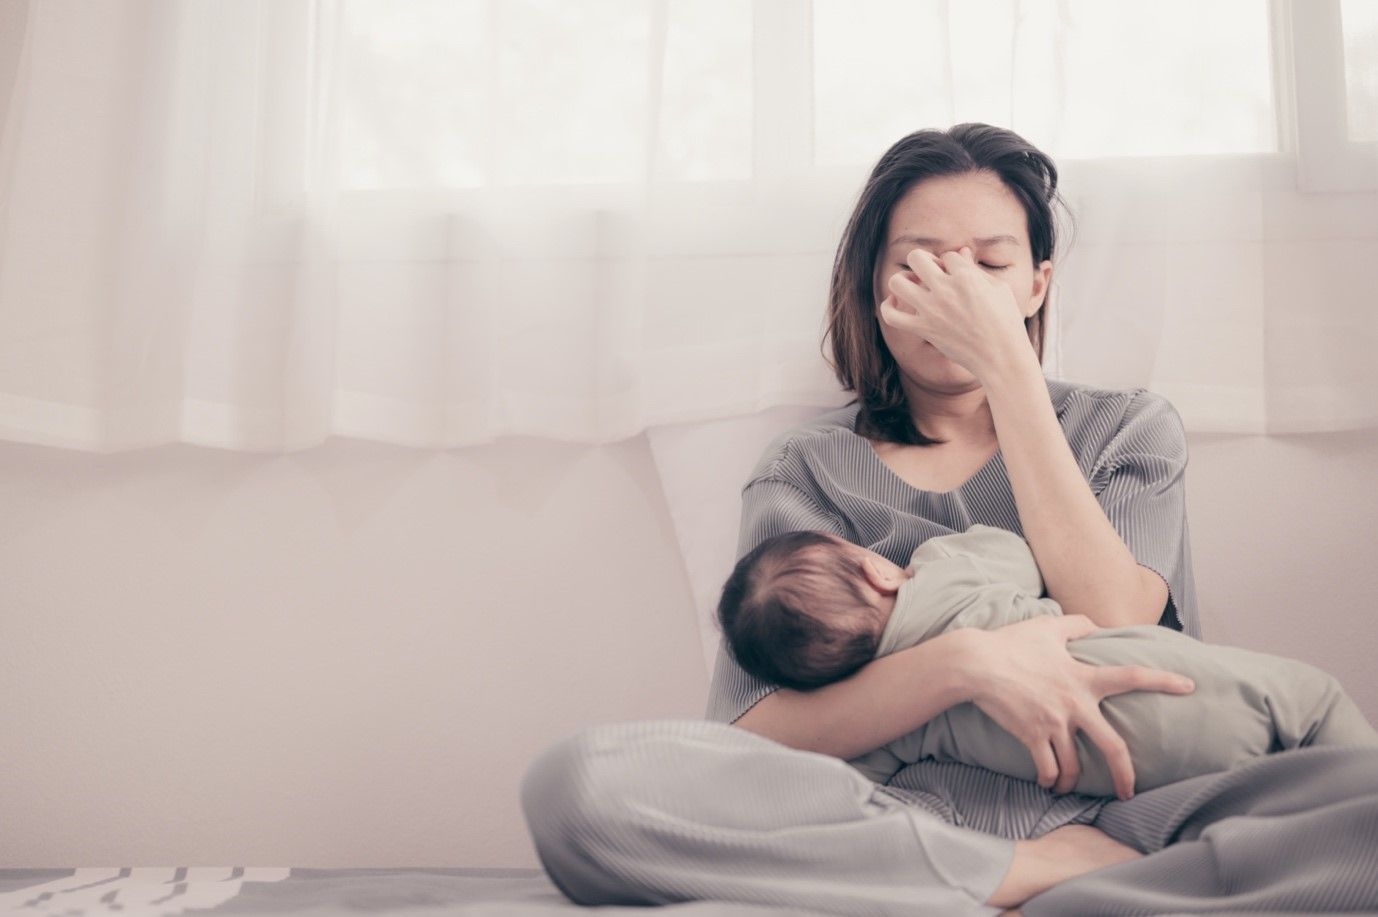 Expectant or New Parents: Living with Anxiety